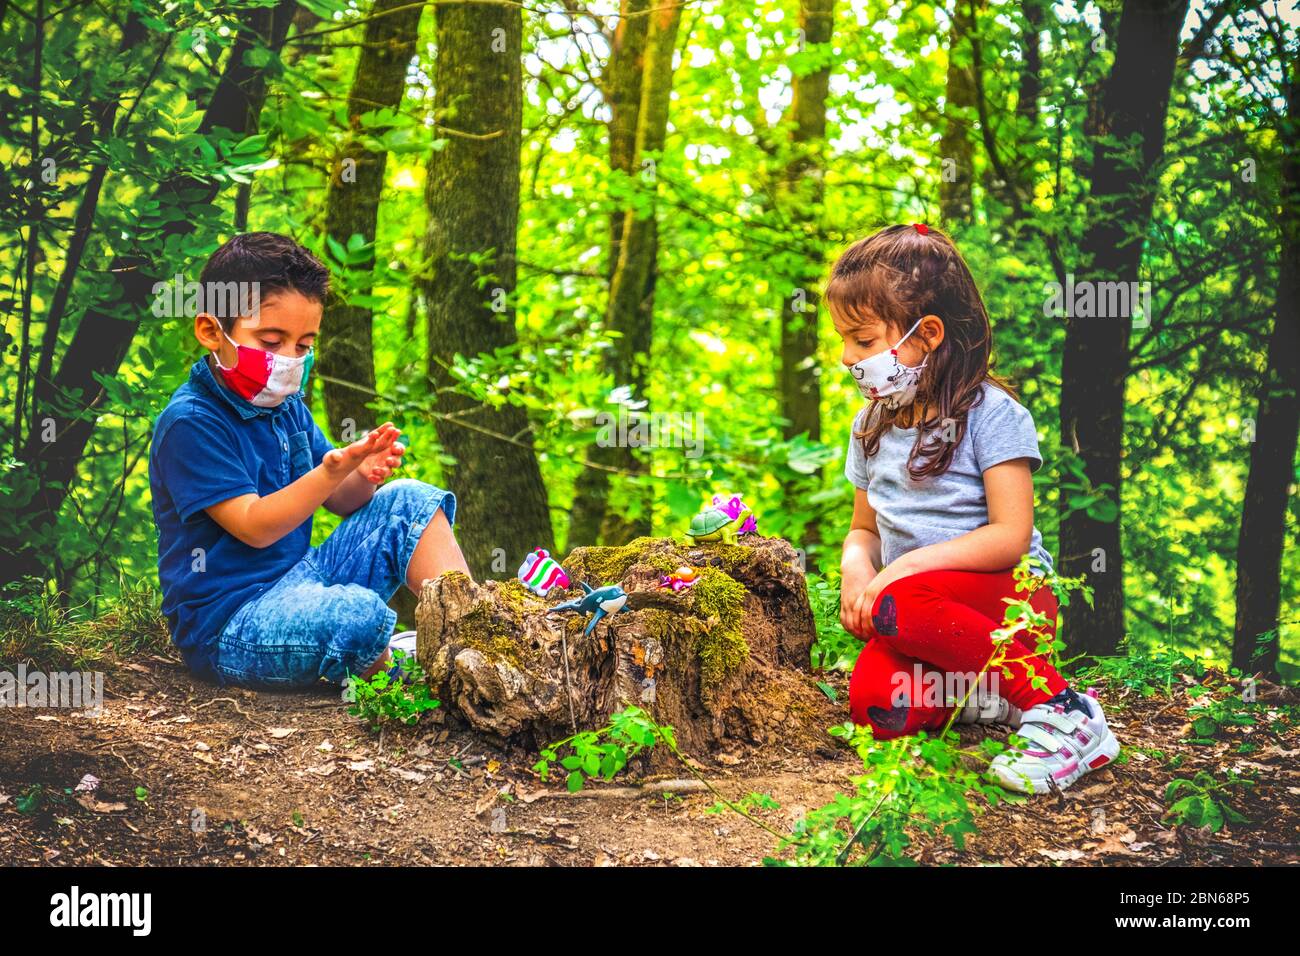 new normal coronavirus background - child play face mask and social distancing in forest to avoid gatherings Stock Photo